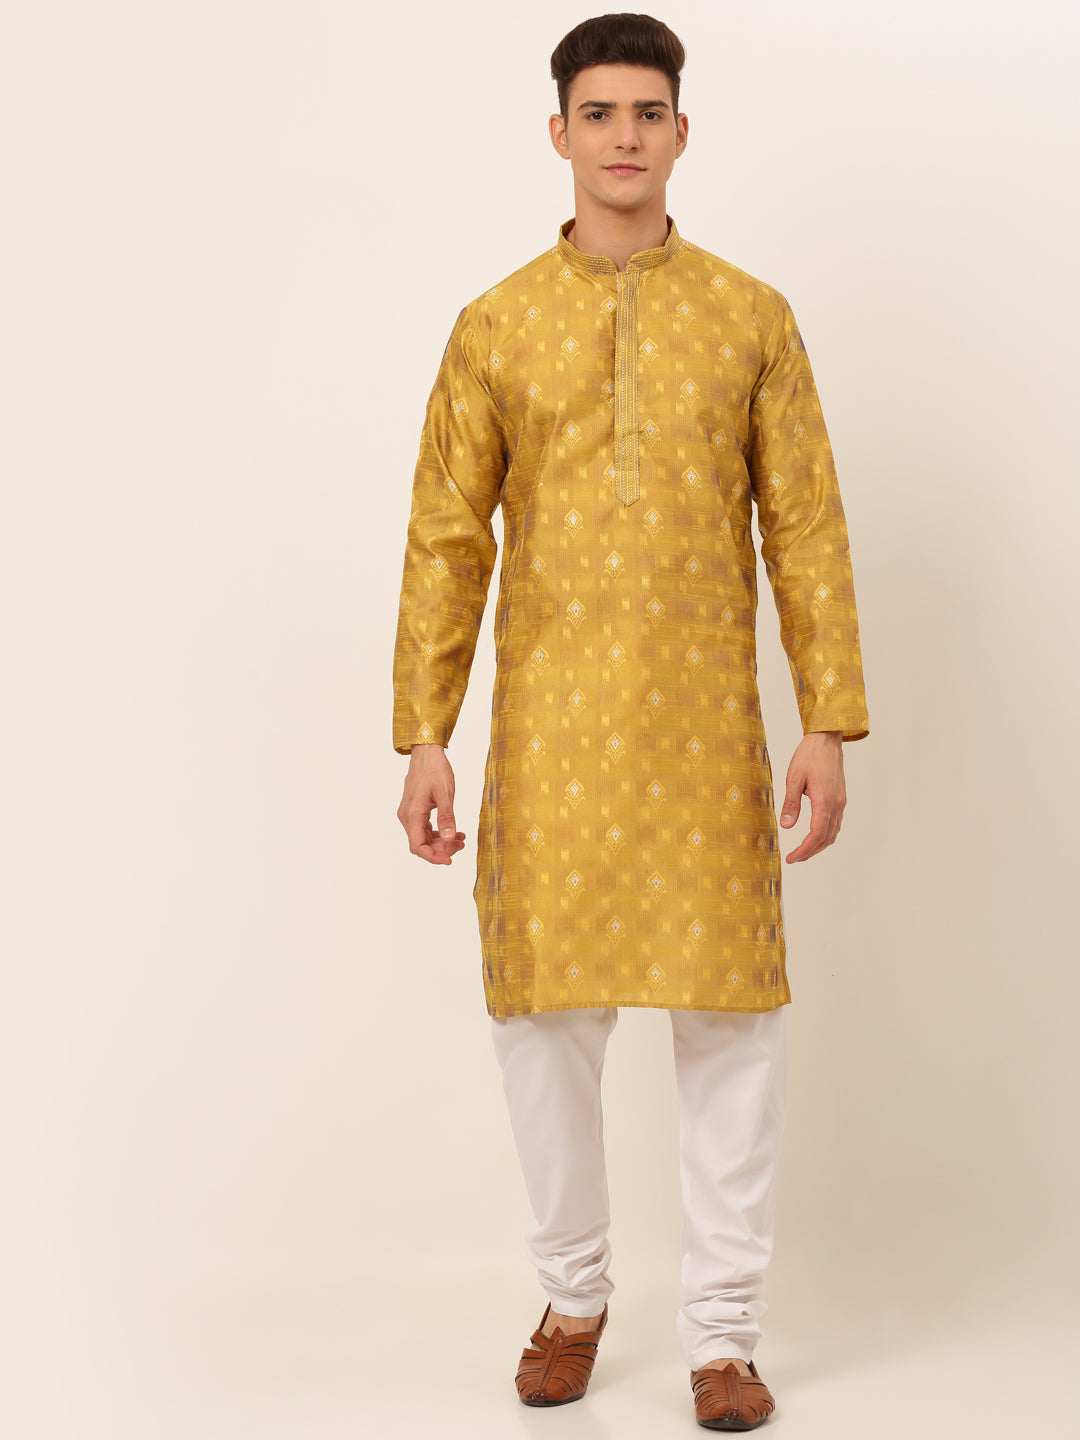 Buy Yellow and Mint Green Combo of 2 Stripe Cotton Short Kurta for Best  Price, Reviews, Free Shipping